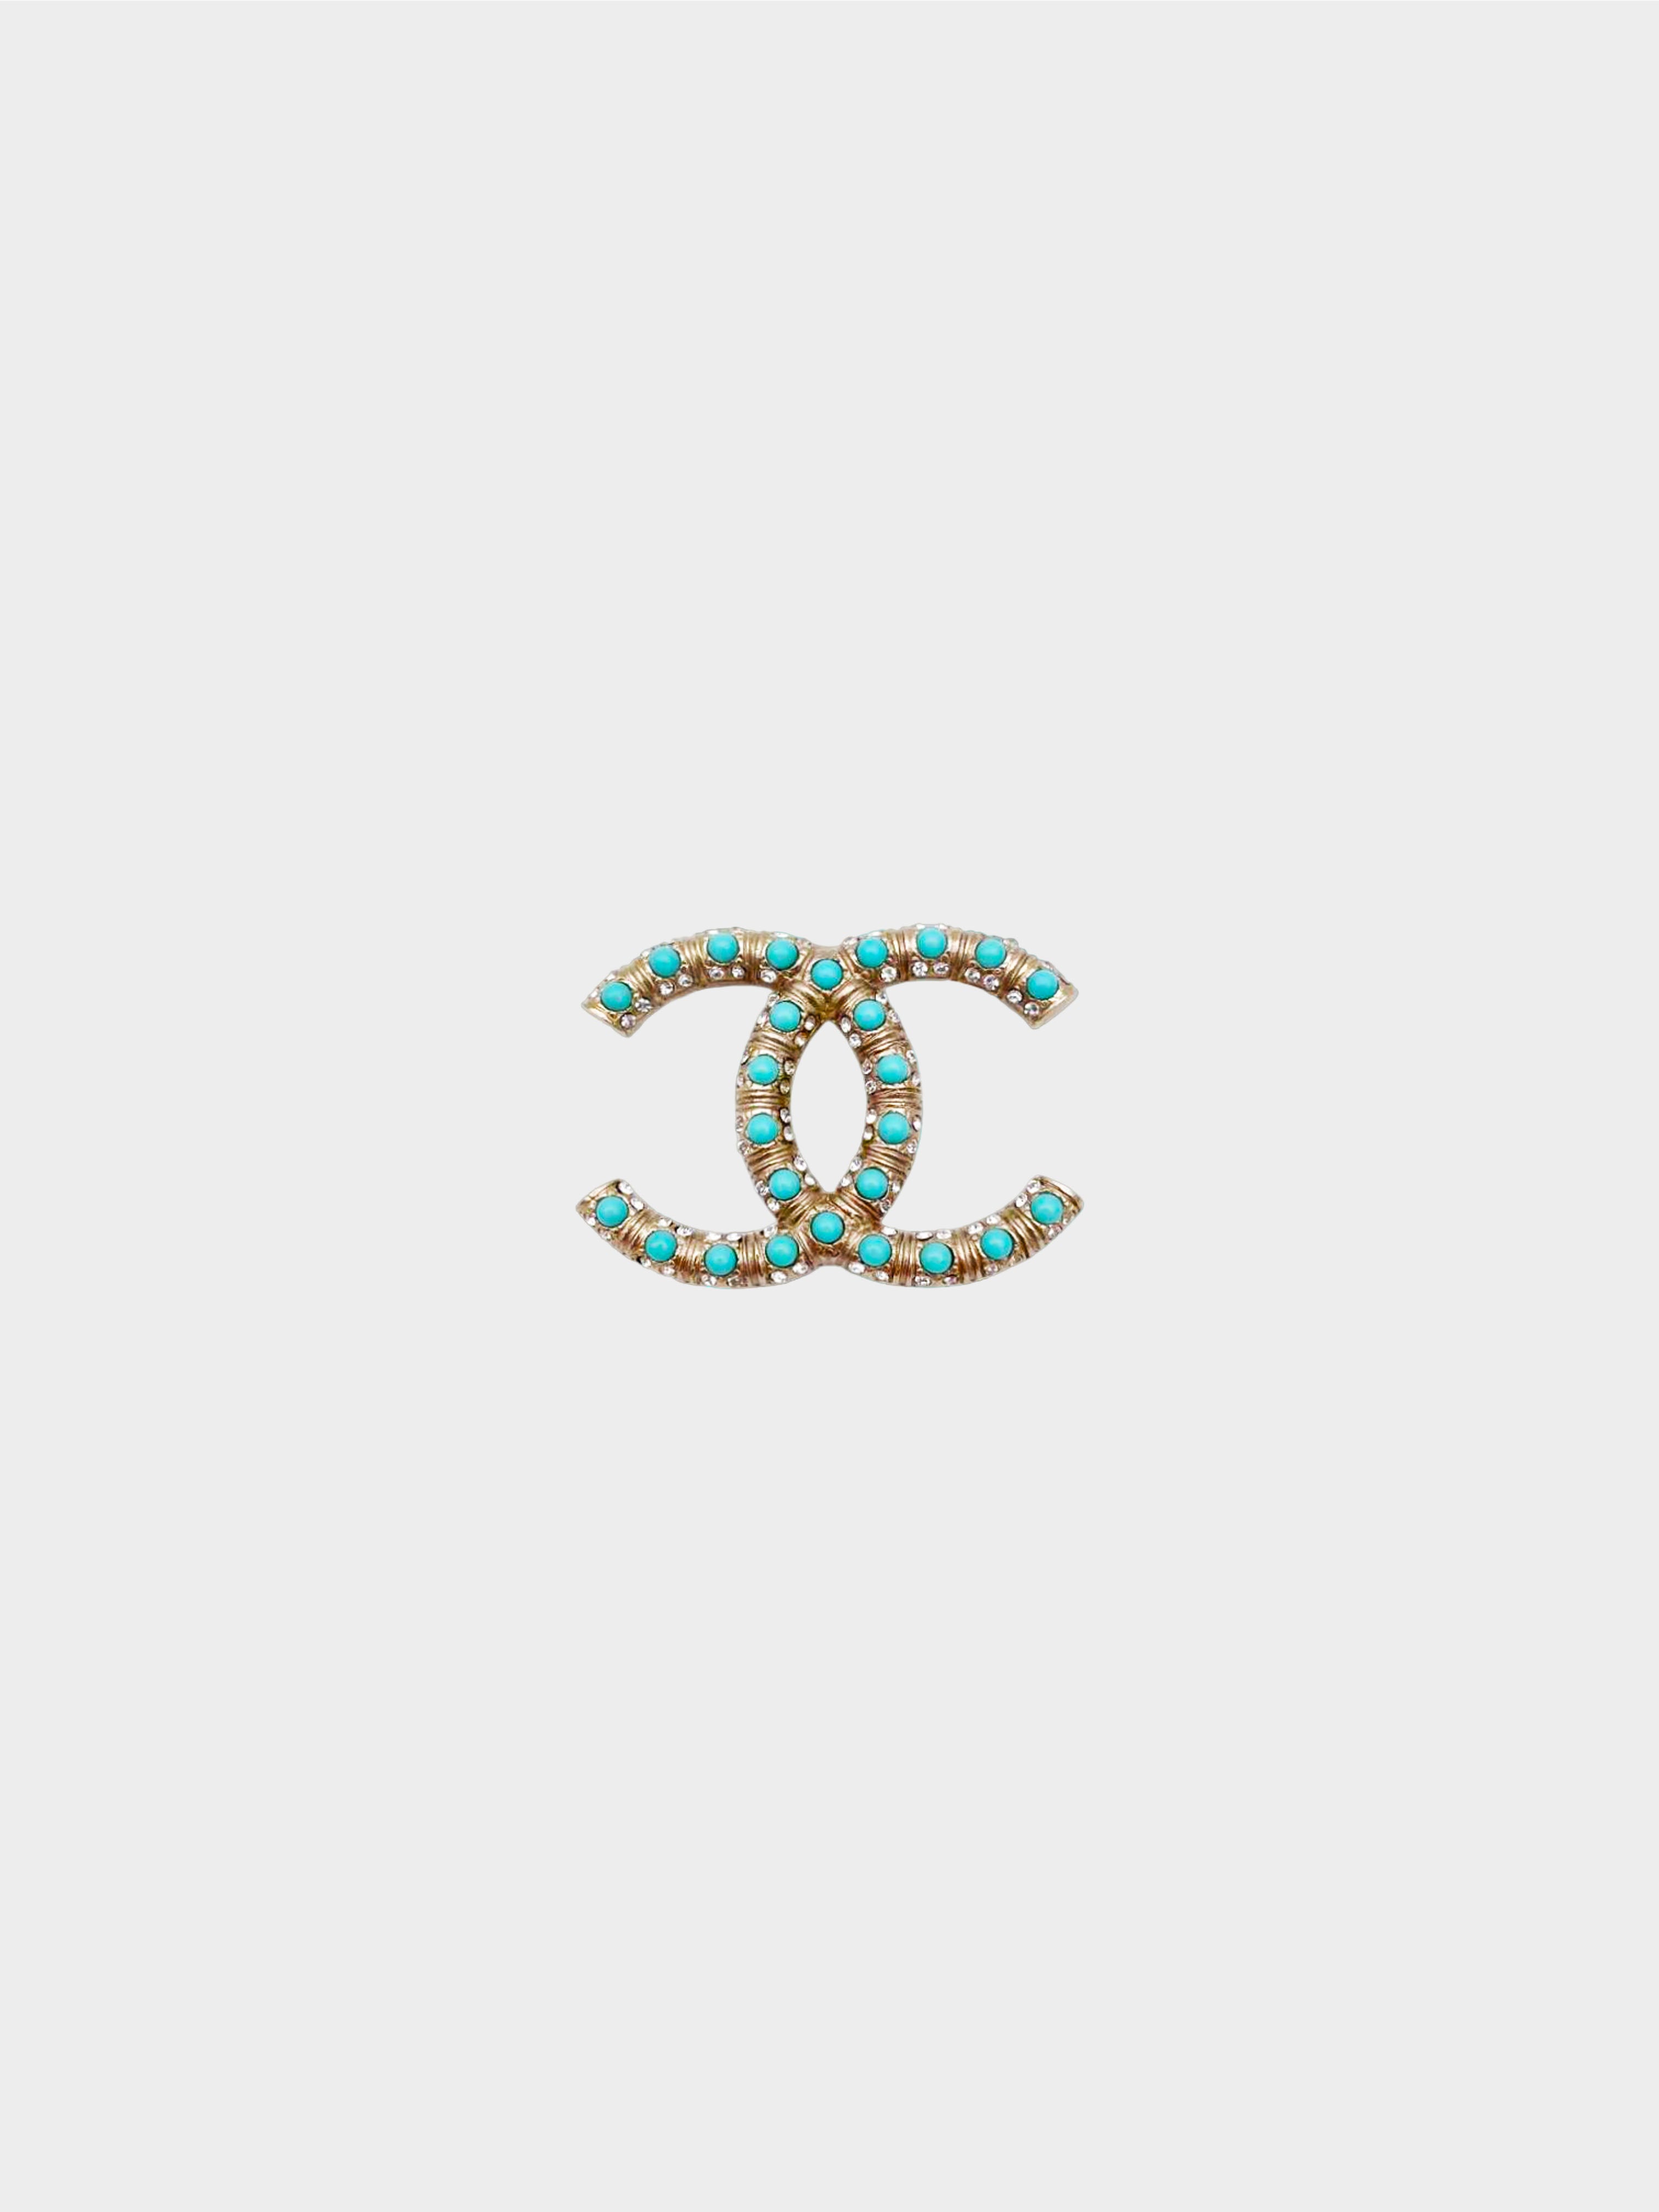 Chanel 2008 Champagne Gold CC Turquoise Studded Rhinestone Brooch